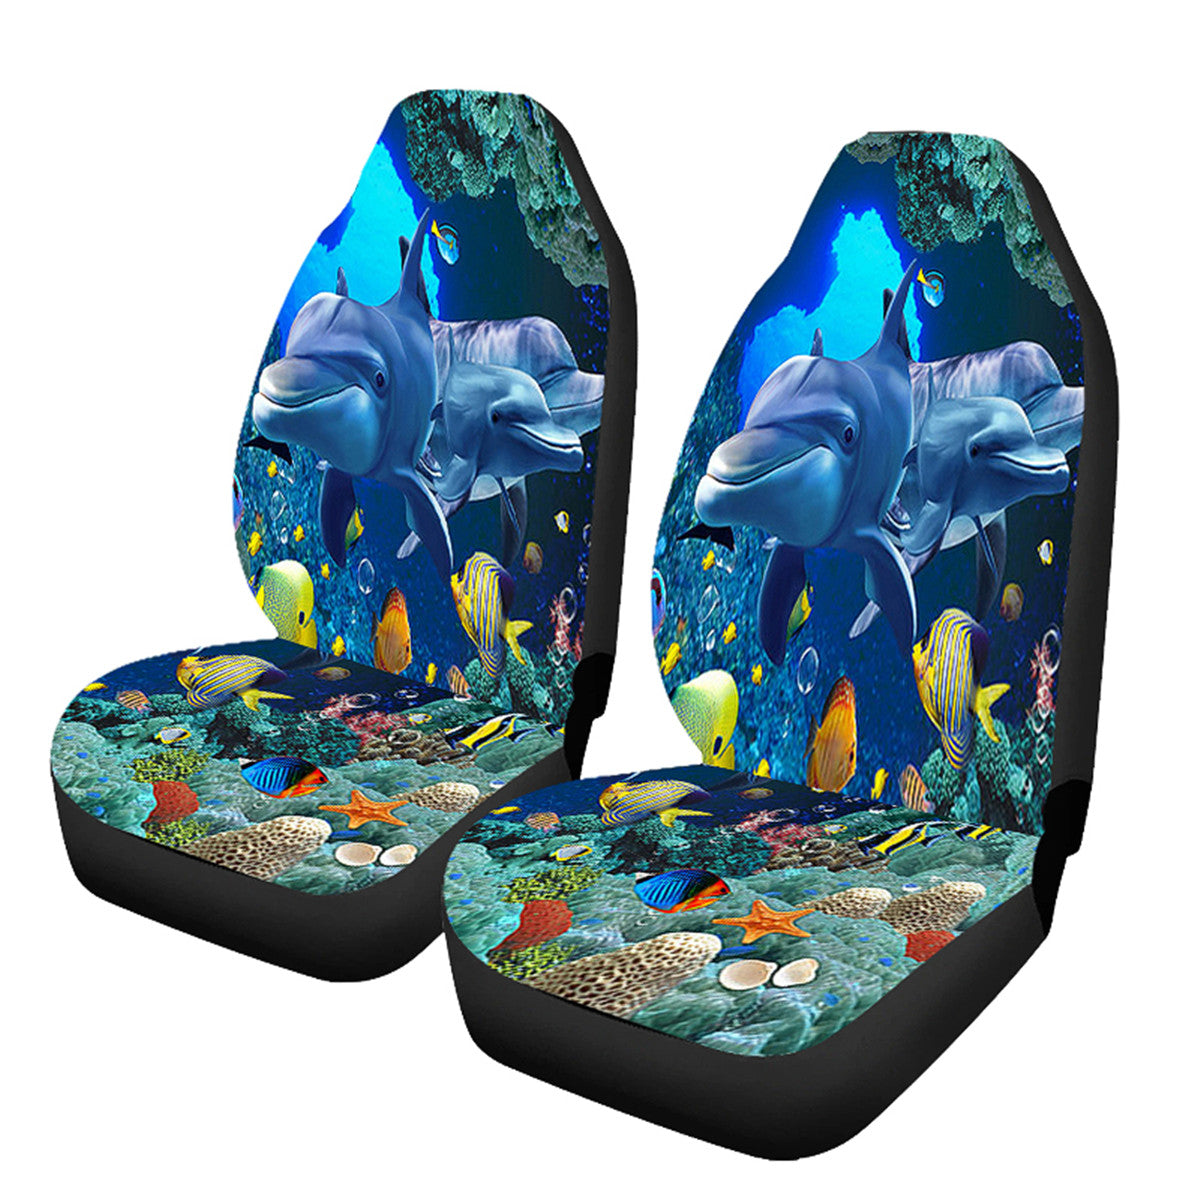 Dark Slate Blue Single / Double Seat Dolphin Universal Printed Car Seat Cover Cushion Cover